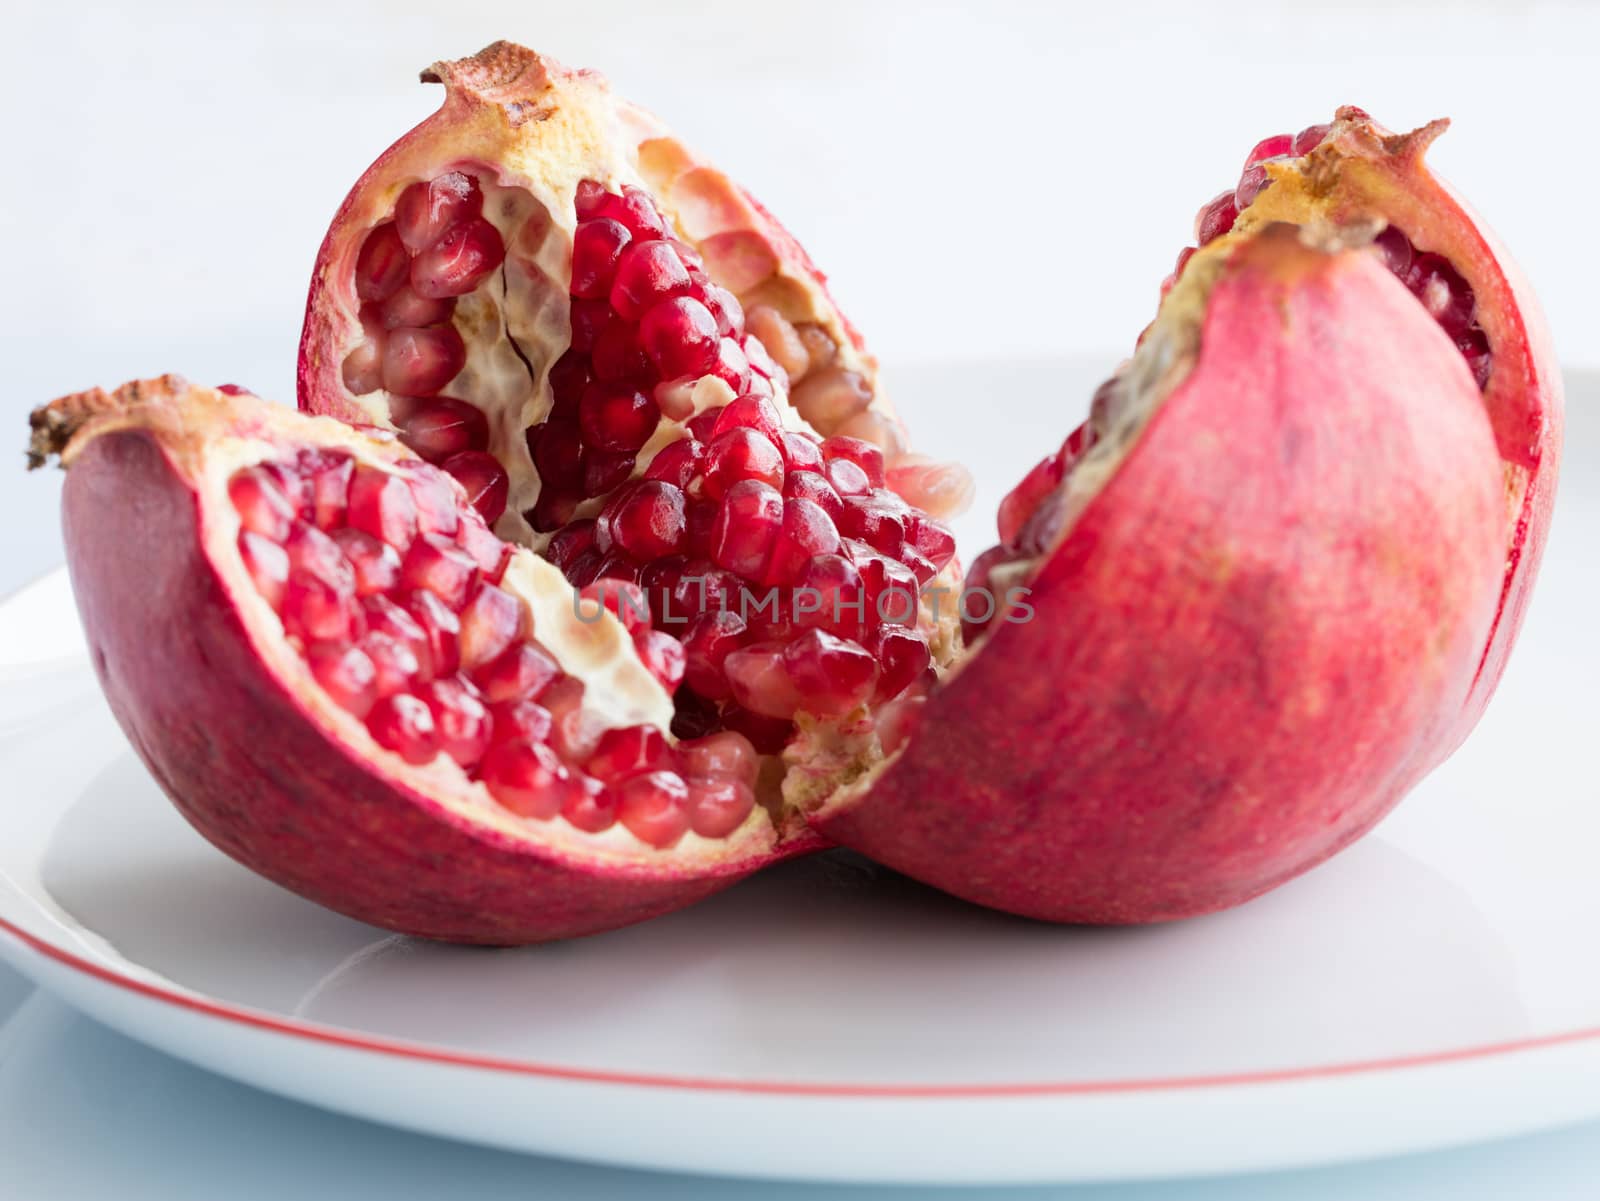 Ripe pomegranate fruit on a white porcelain plate by Sergii